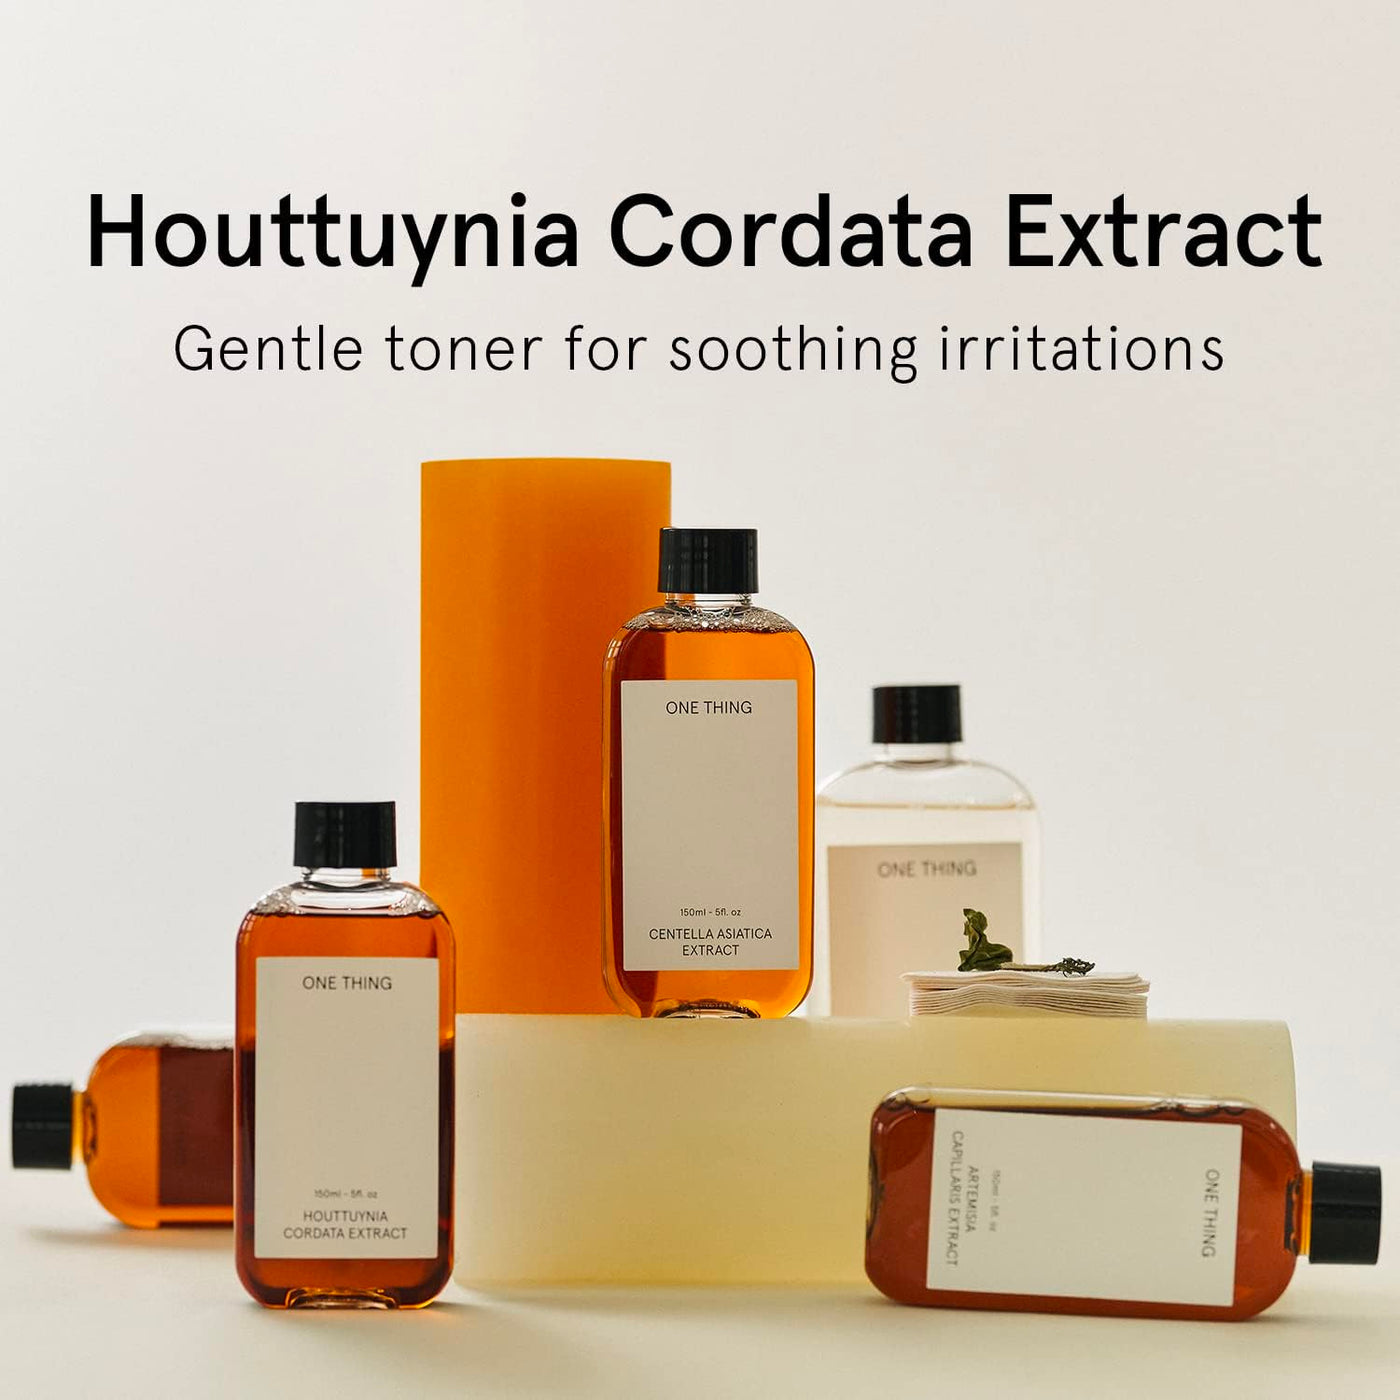 One Thing Houttuynia Cordata Extract